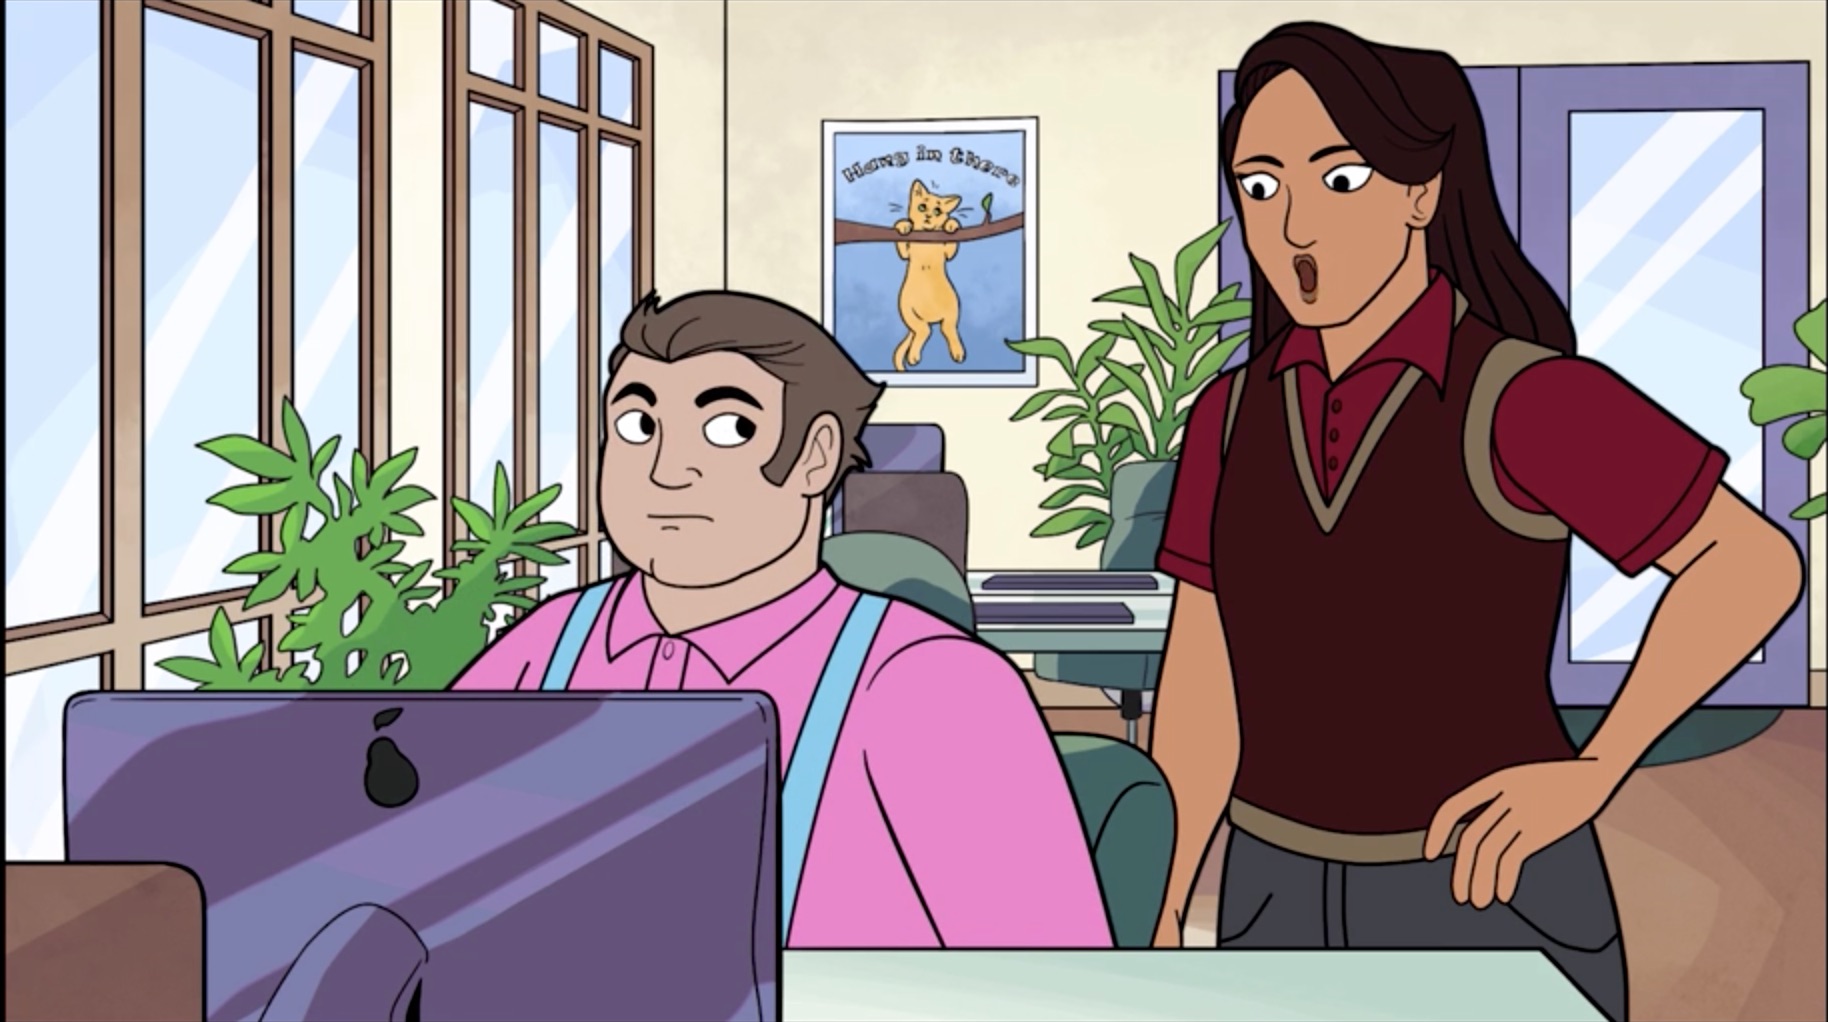 Cartoon of woman with a shocked expression standing behind a man who is seated at his computer